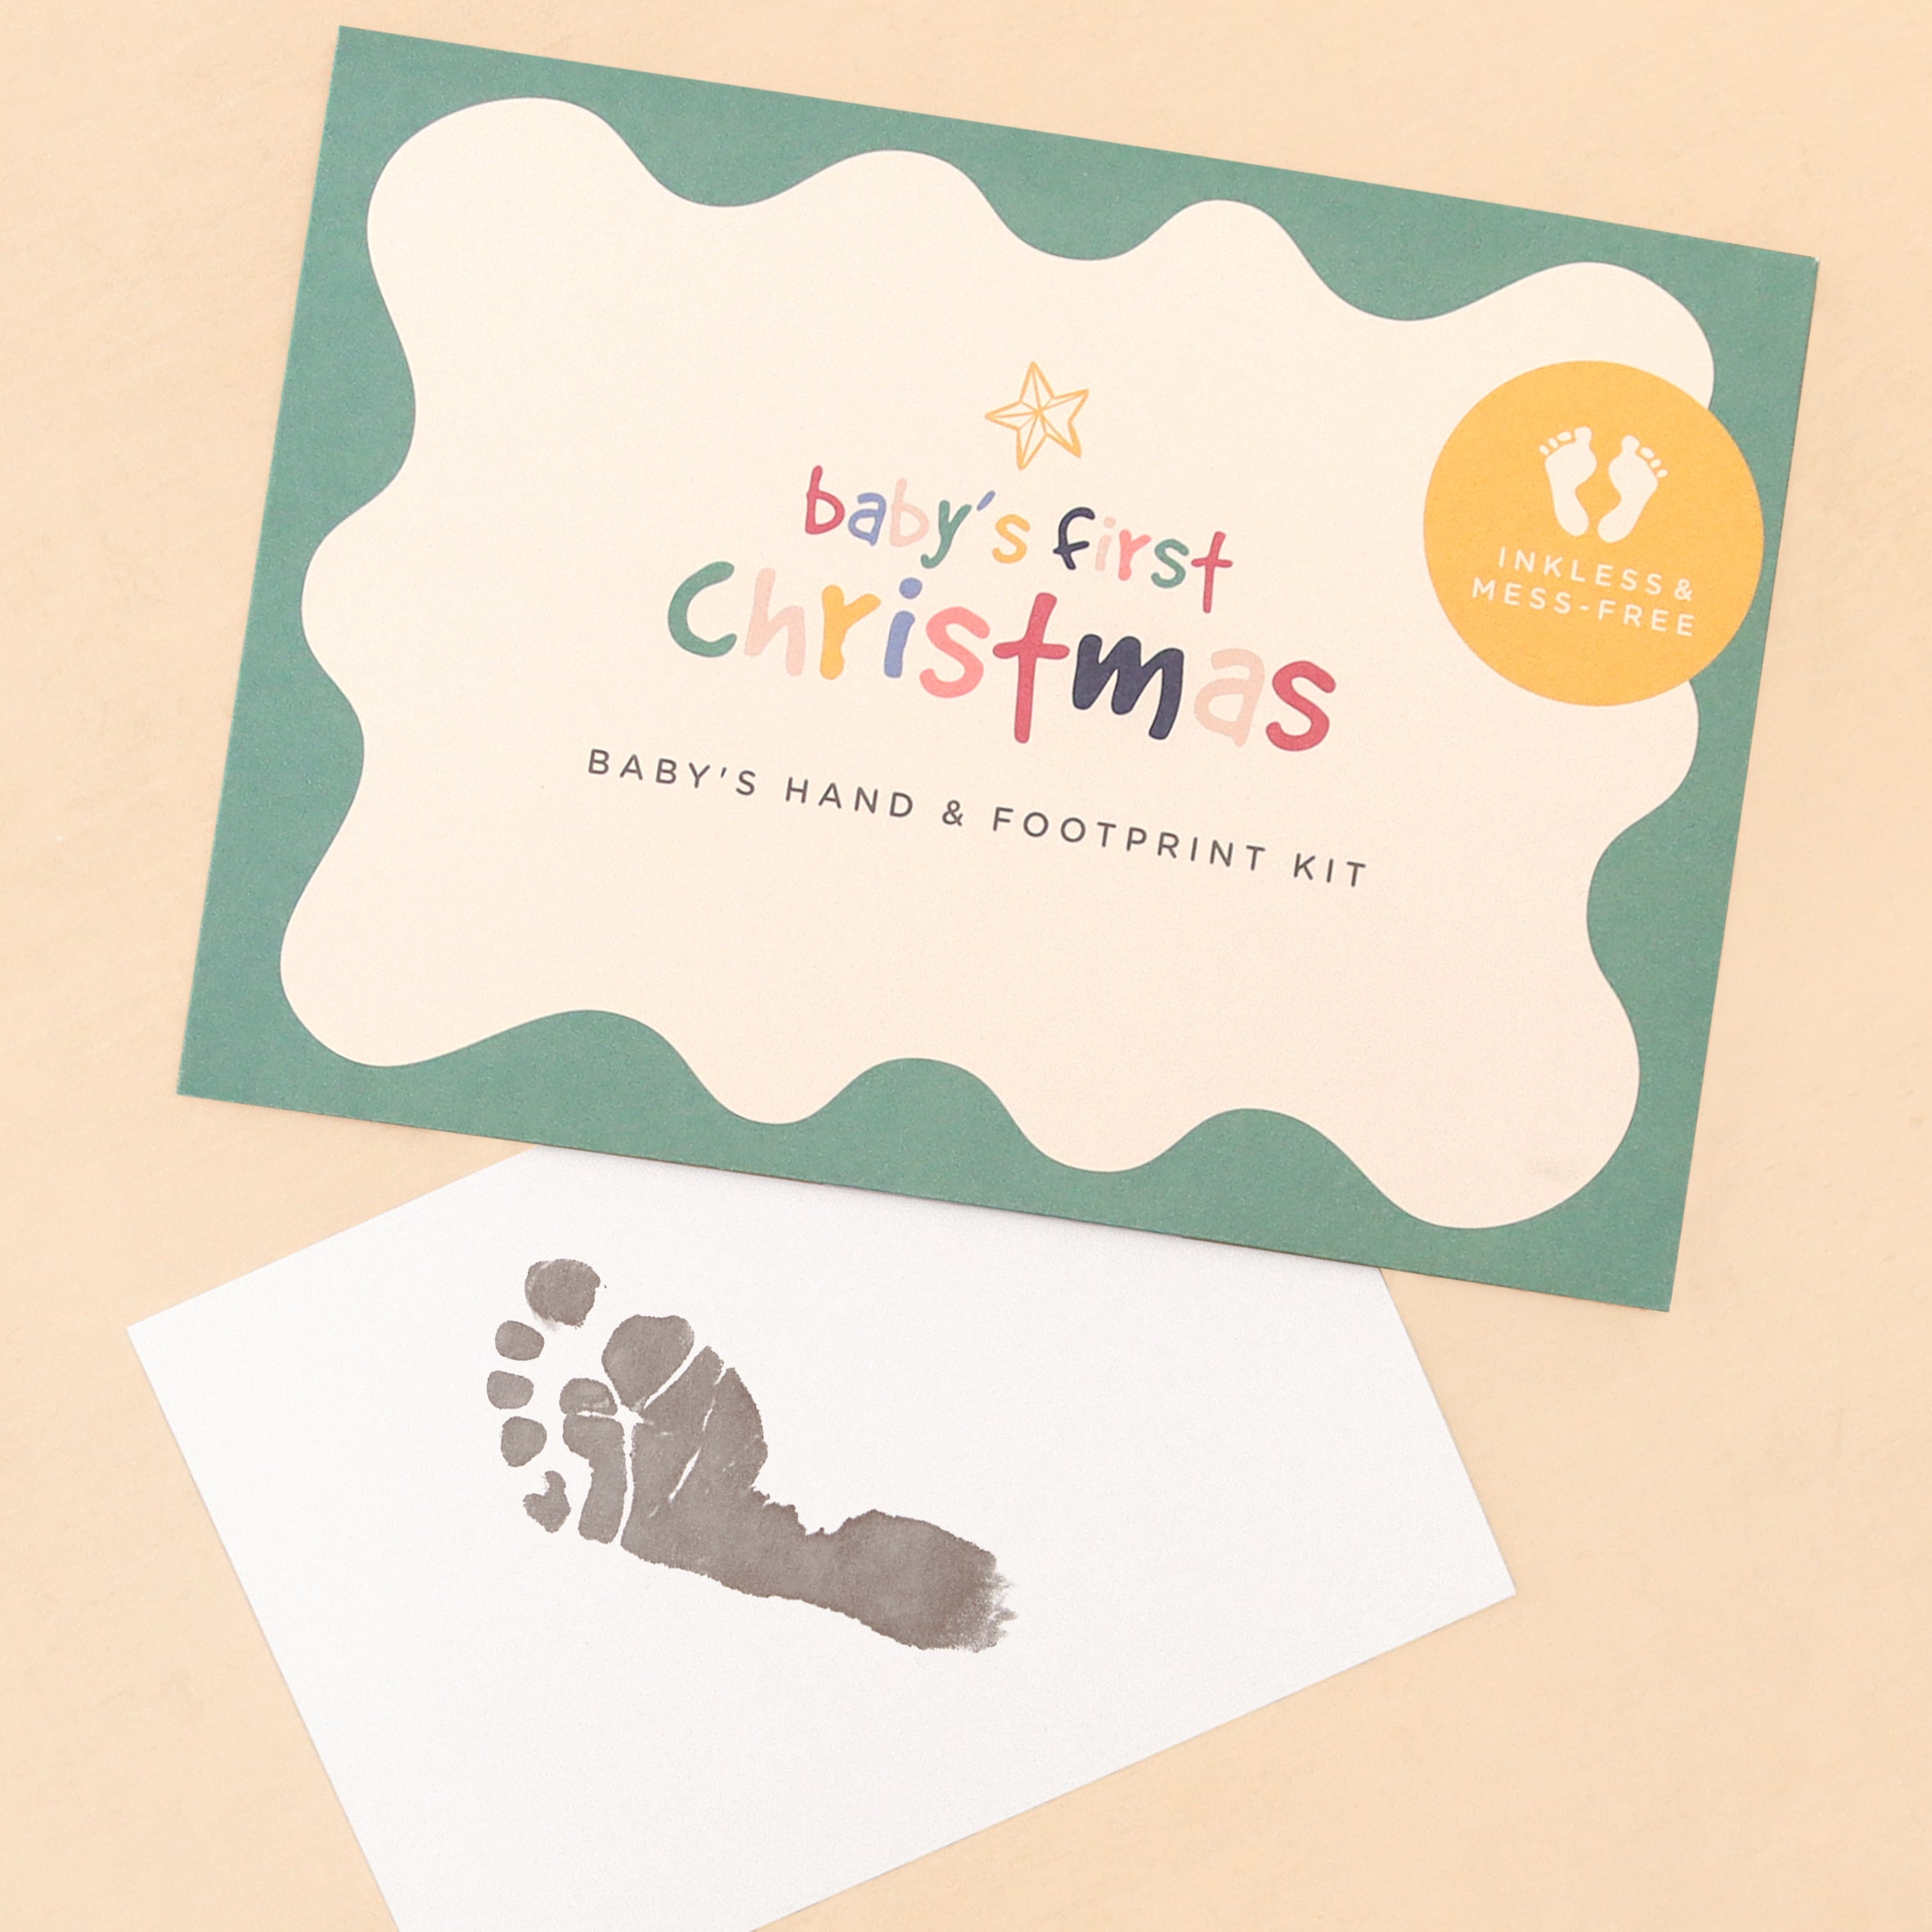 Baby's First Christmas Hand & Footprint Kit